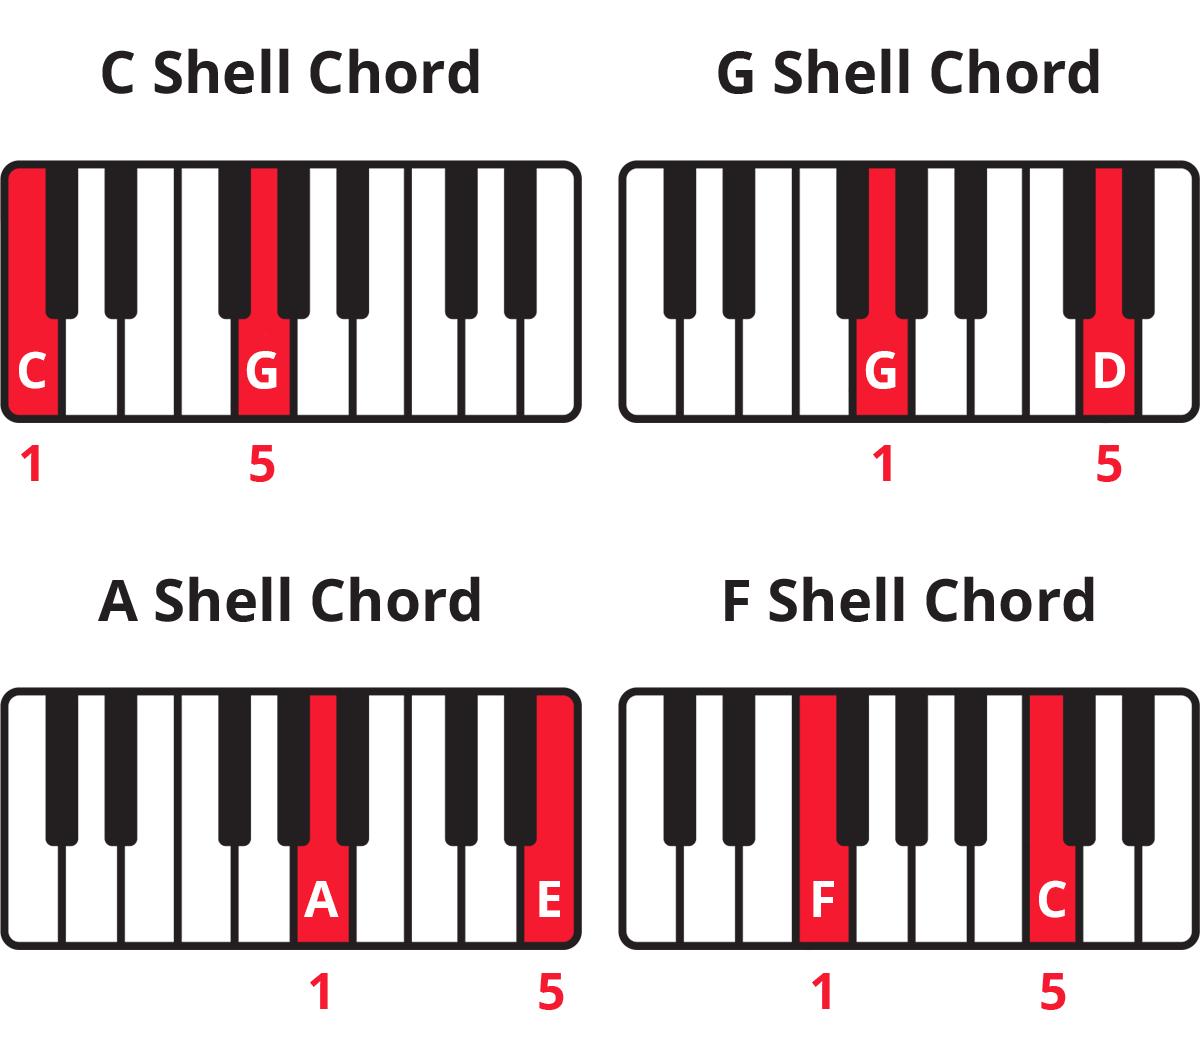 Diagrams of C, G, A, and F shell chords with keys labelled and highlighted in red and fingering underneath.